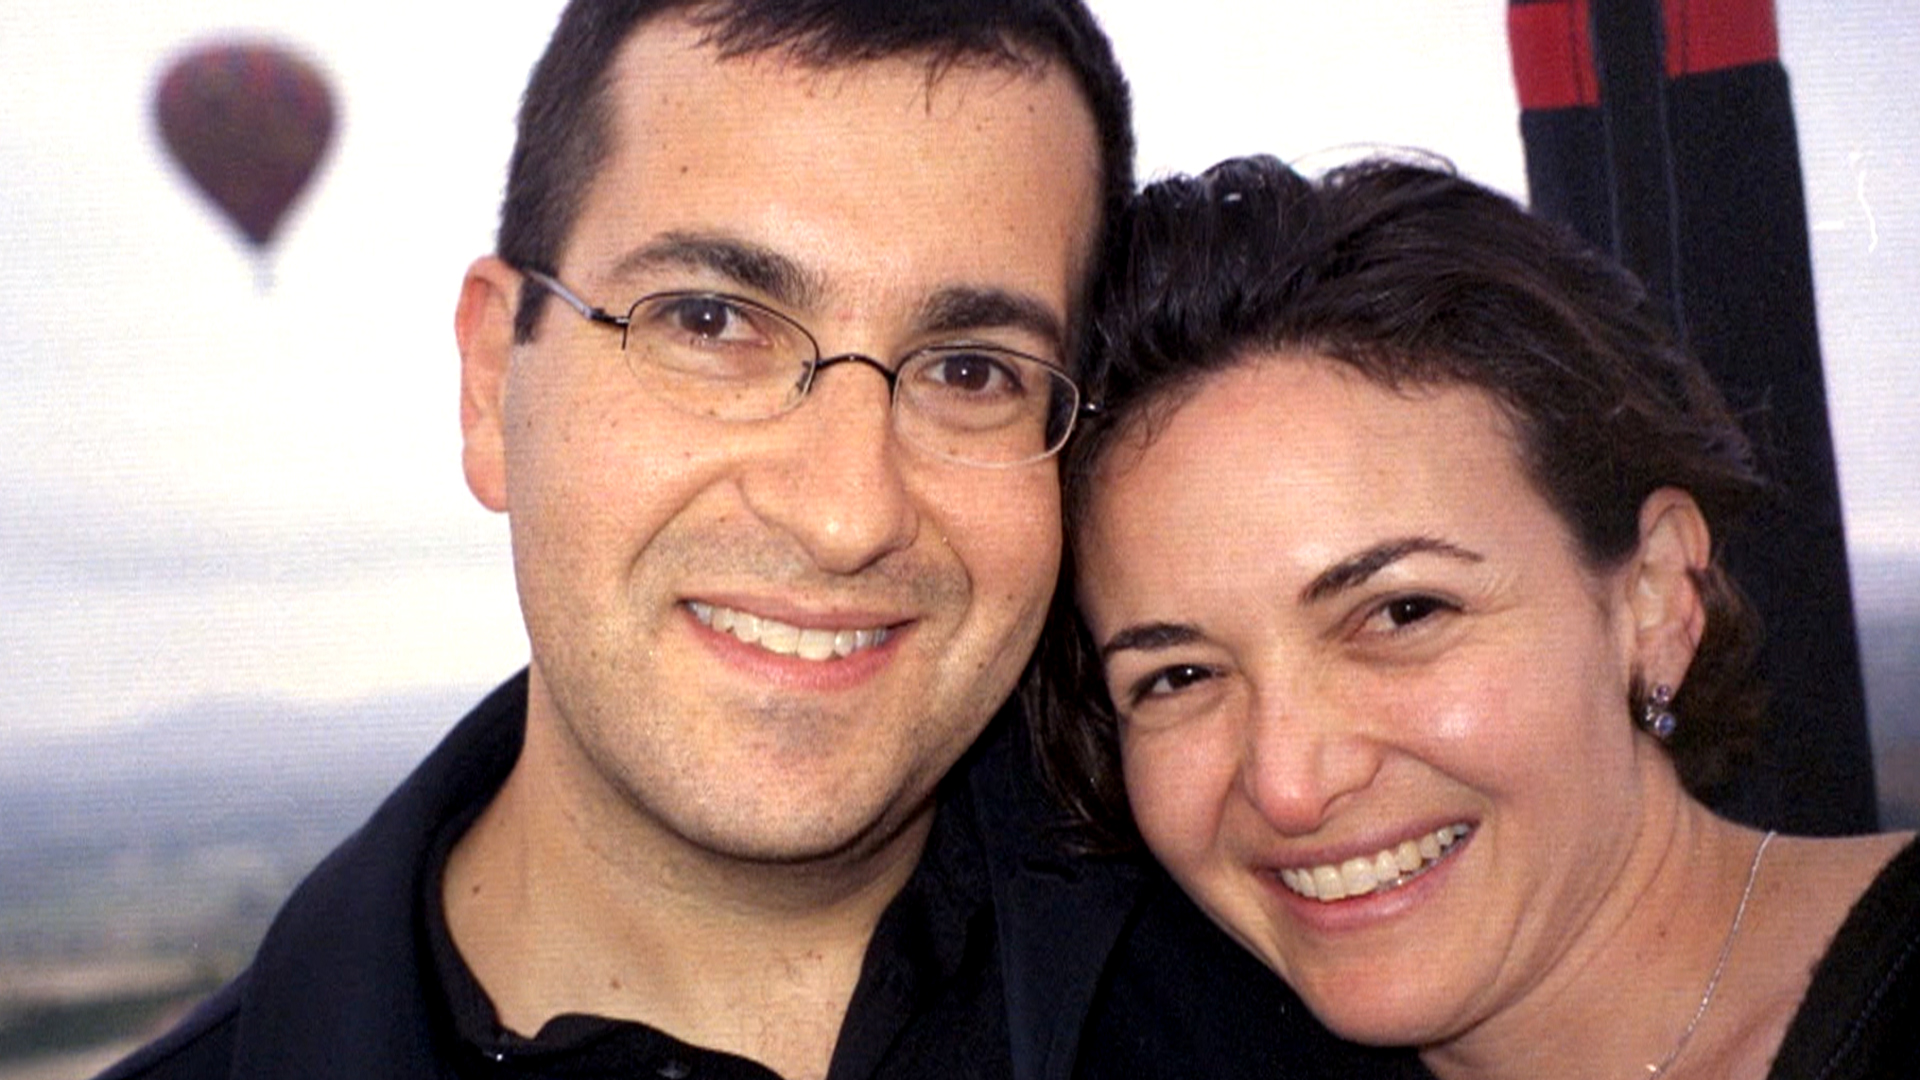 Sheryl Sandberg may be dating: Is there a right time to move on after loss?1920 x 1080